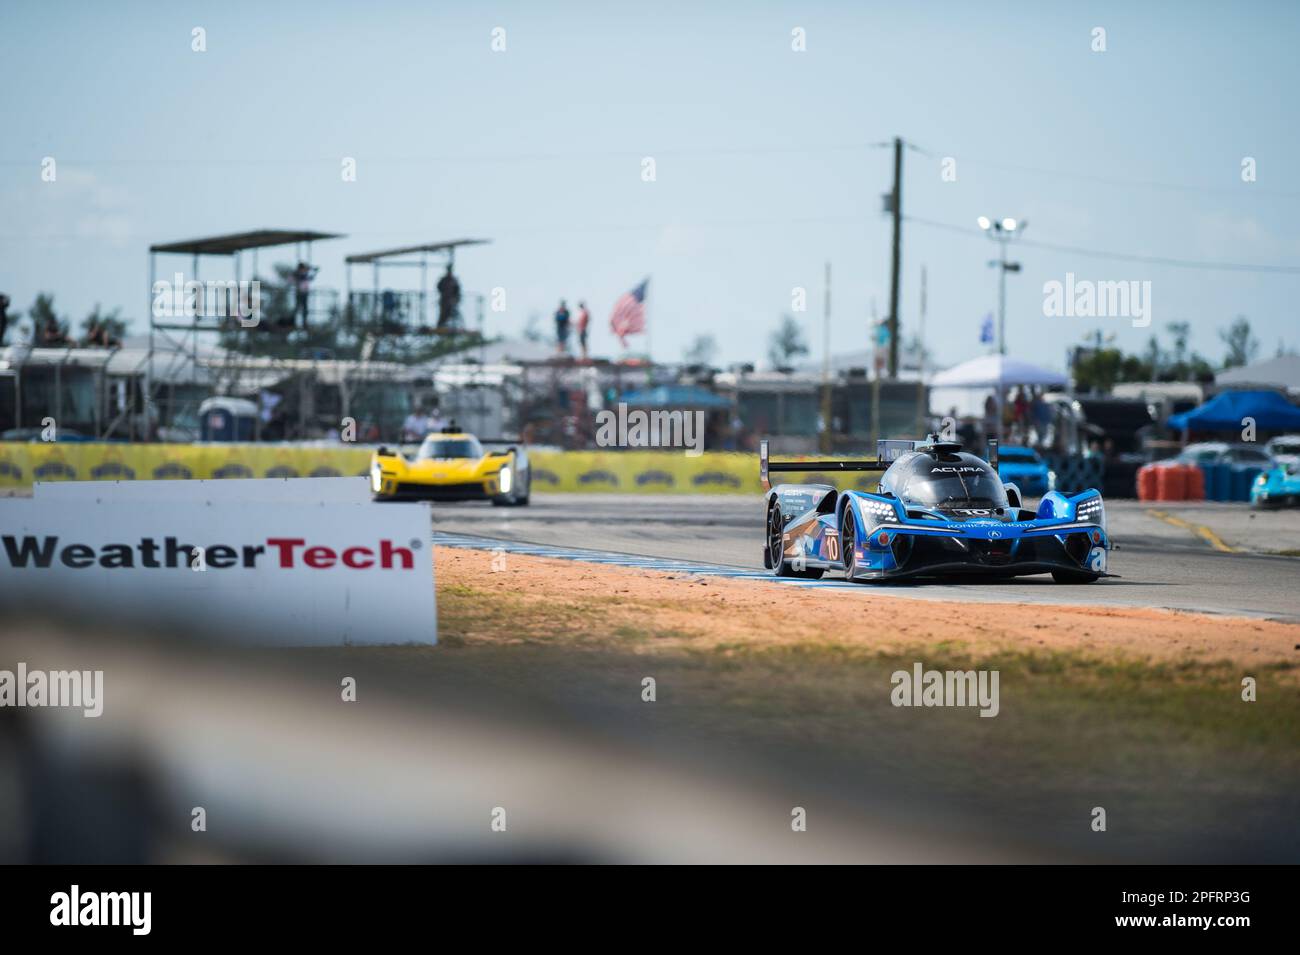 10 TAYLOR Ricky (usa), ALBUQUERQUE Filipe (prt), DELETRAZ Louis (che), Konica Minolta Acura ARX-06, Acura ARX-06, action during the Mobil 1 Twelve Hours of Sebring 2023, 2nd round of the 2023 IMSA SportsCar Championship, from March 15 to 18, 2023 on the Sebring International Raceway in Sebring, Florida, USA - Photo Jan-Patrick Wagner/DPPI Credit: DPPI Media/Alamy Live News Stock Photo